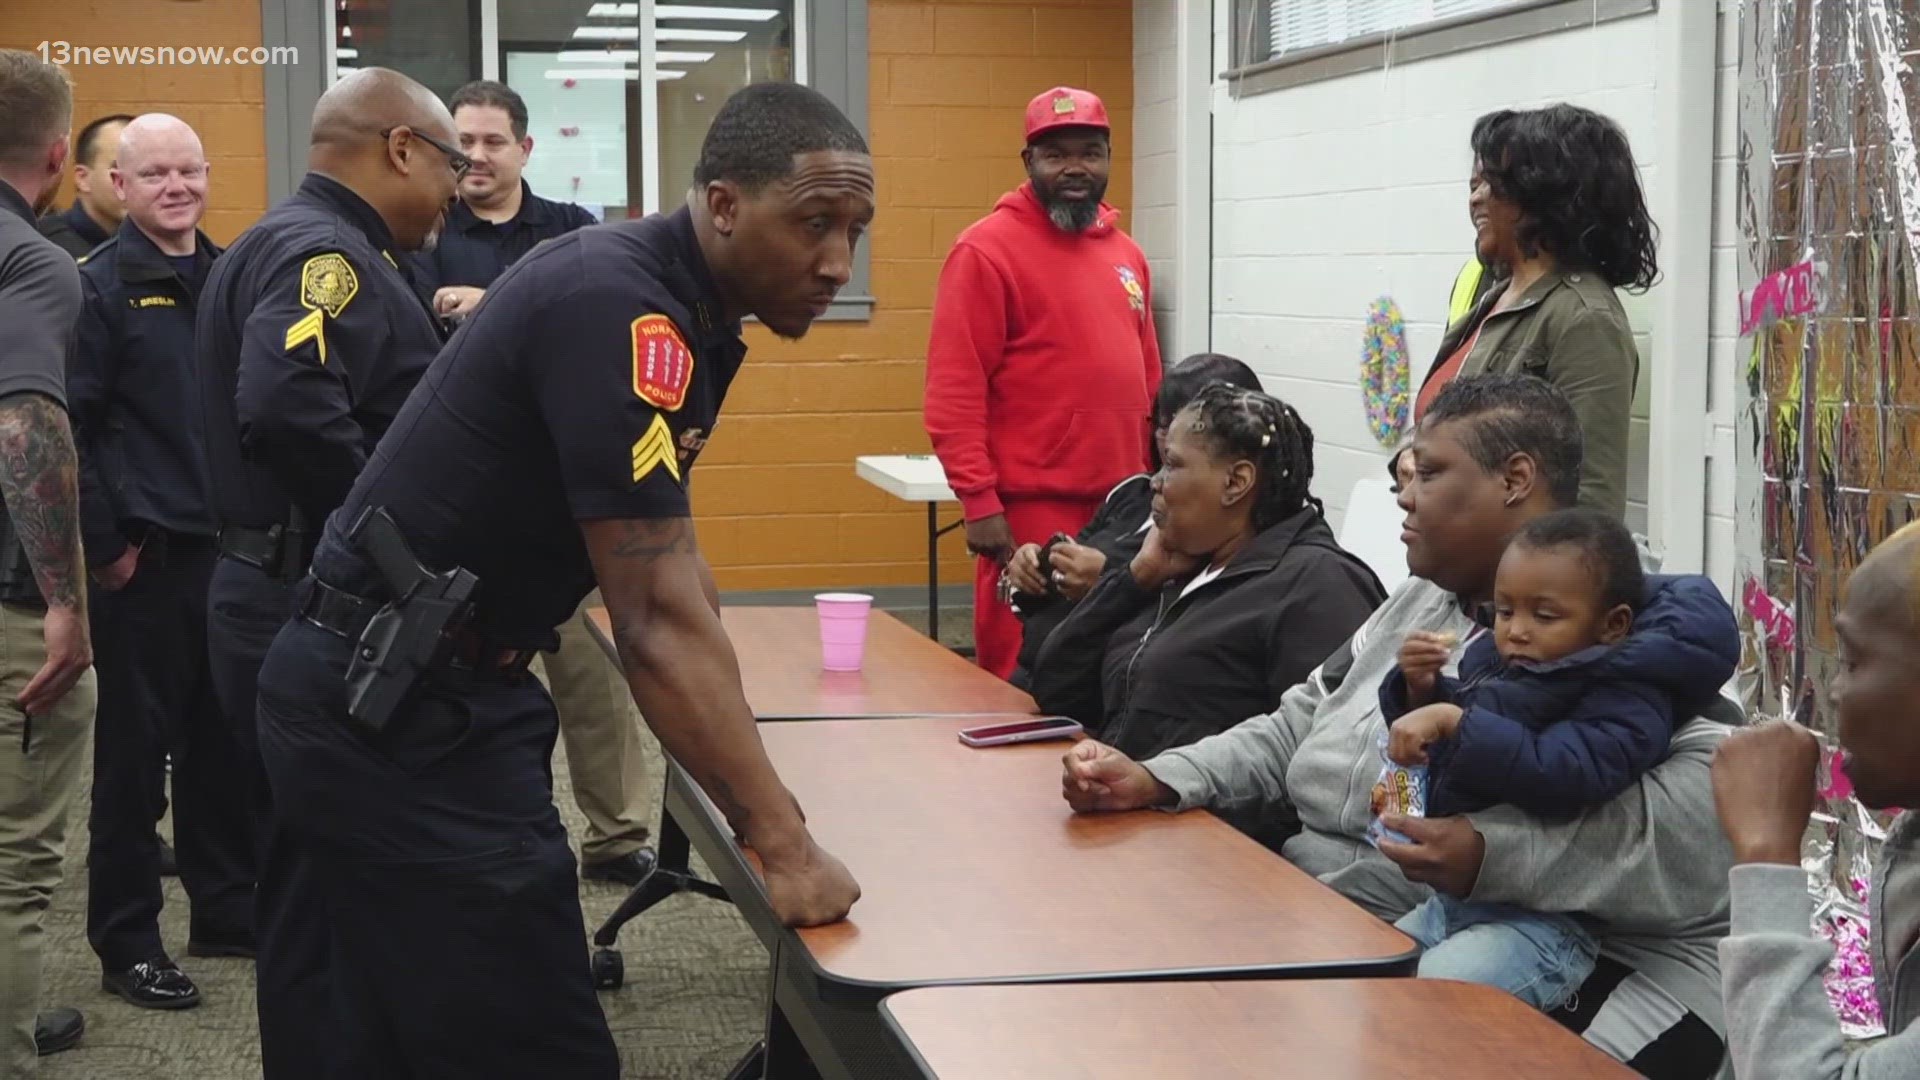 Tonight, people living in the City's Calvert Square neighborhood met with the city's police officers just hours after violence touched the neighborhood.